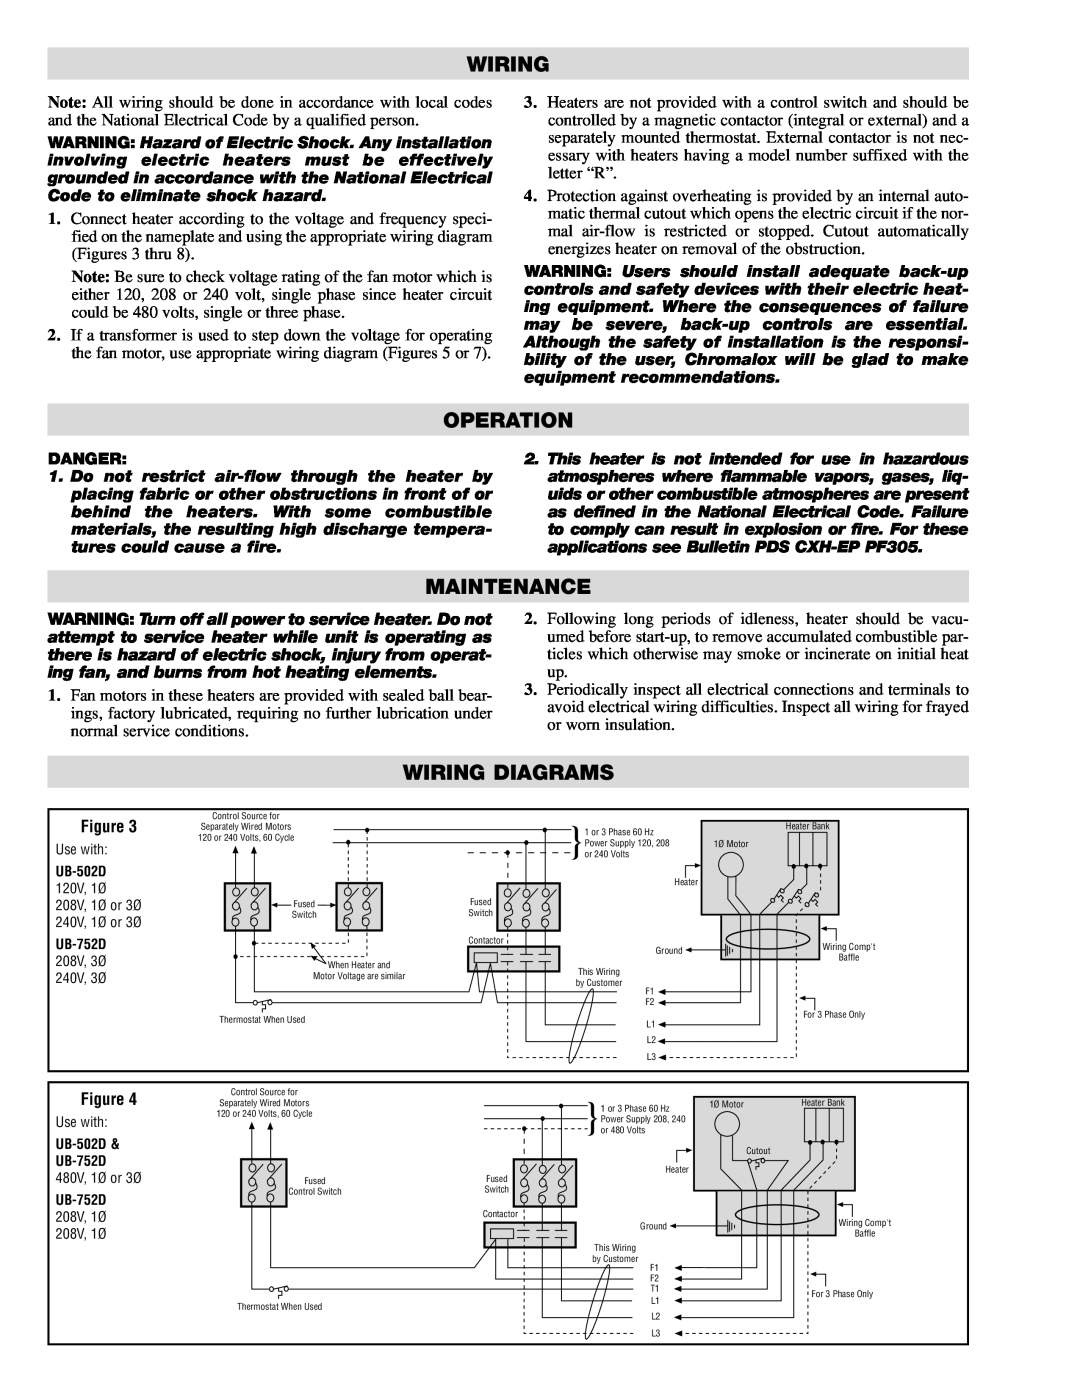 Chromalox UB-502D, UB-752D specifications Operation, Maintenance, Wiring Diagrams 